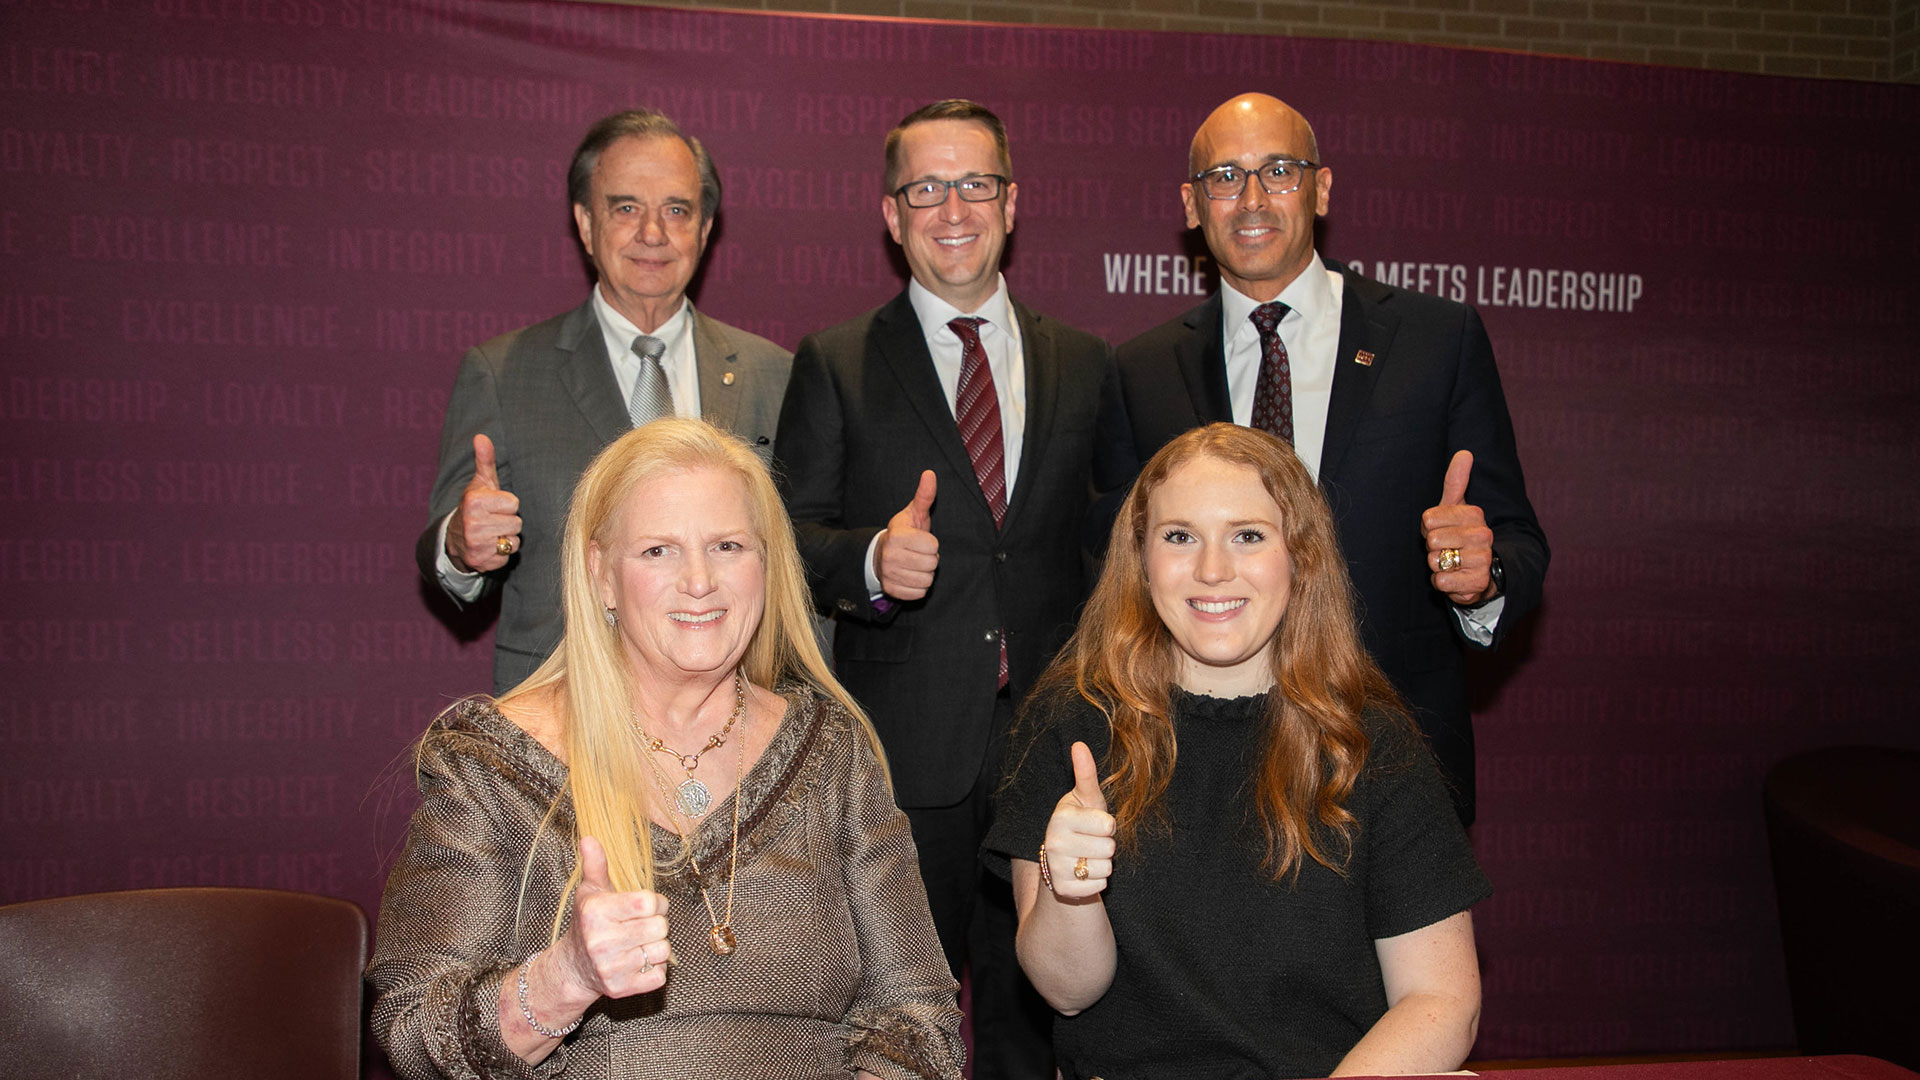 The Texas A&M University System Chancellor John Sharp, Mays Business School Dean Nate Sharp, Texas A&M Foundation, President & Chief Executive Officer Tyson Voelkel '96, Kathy Mays and Paige Johnson '21